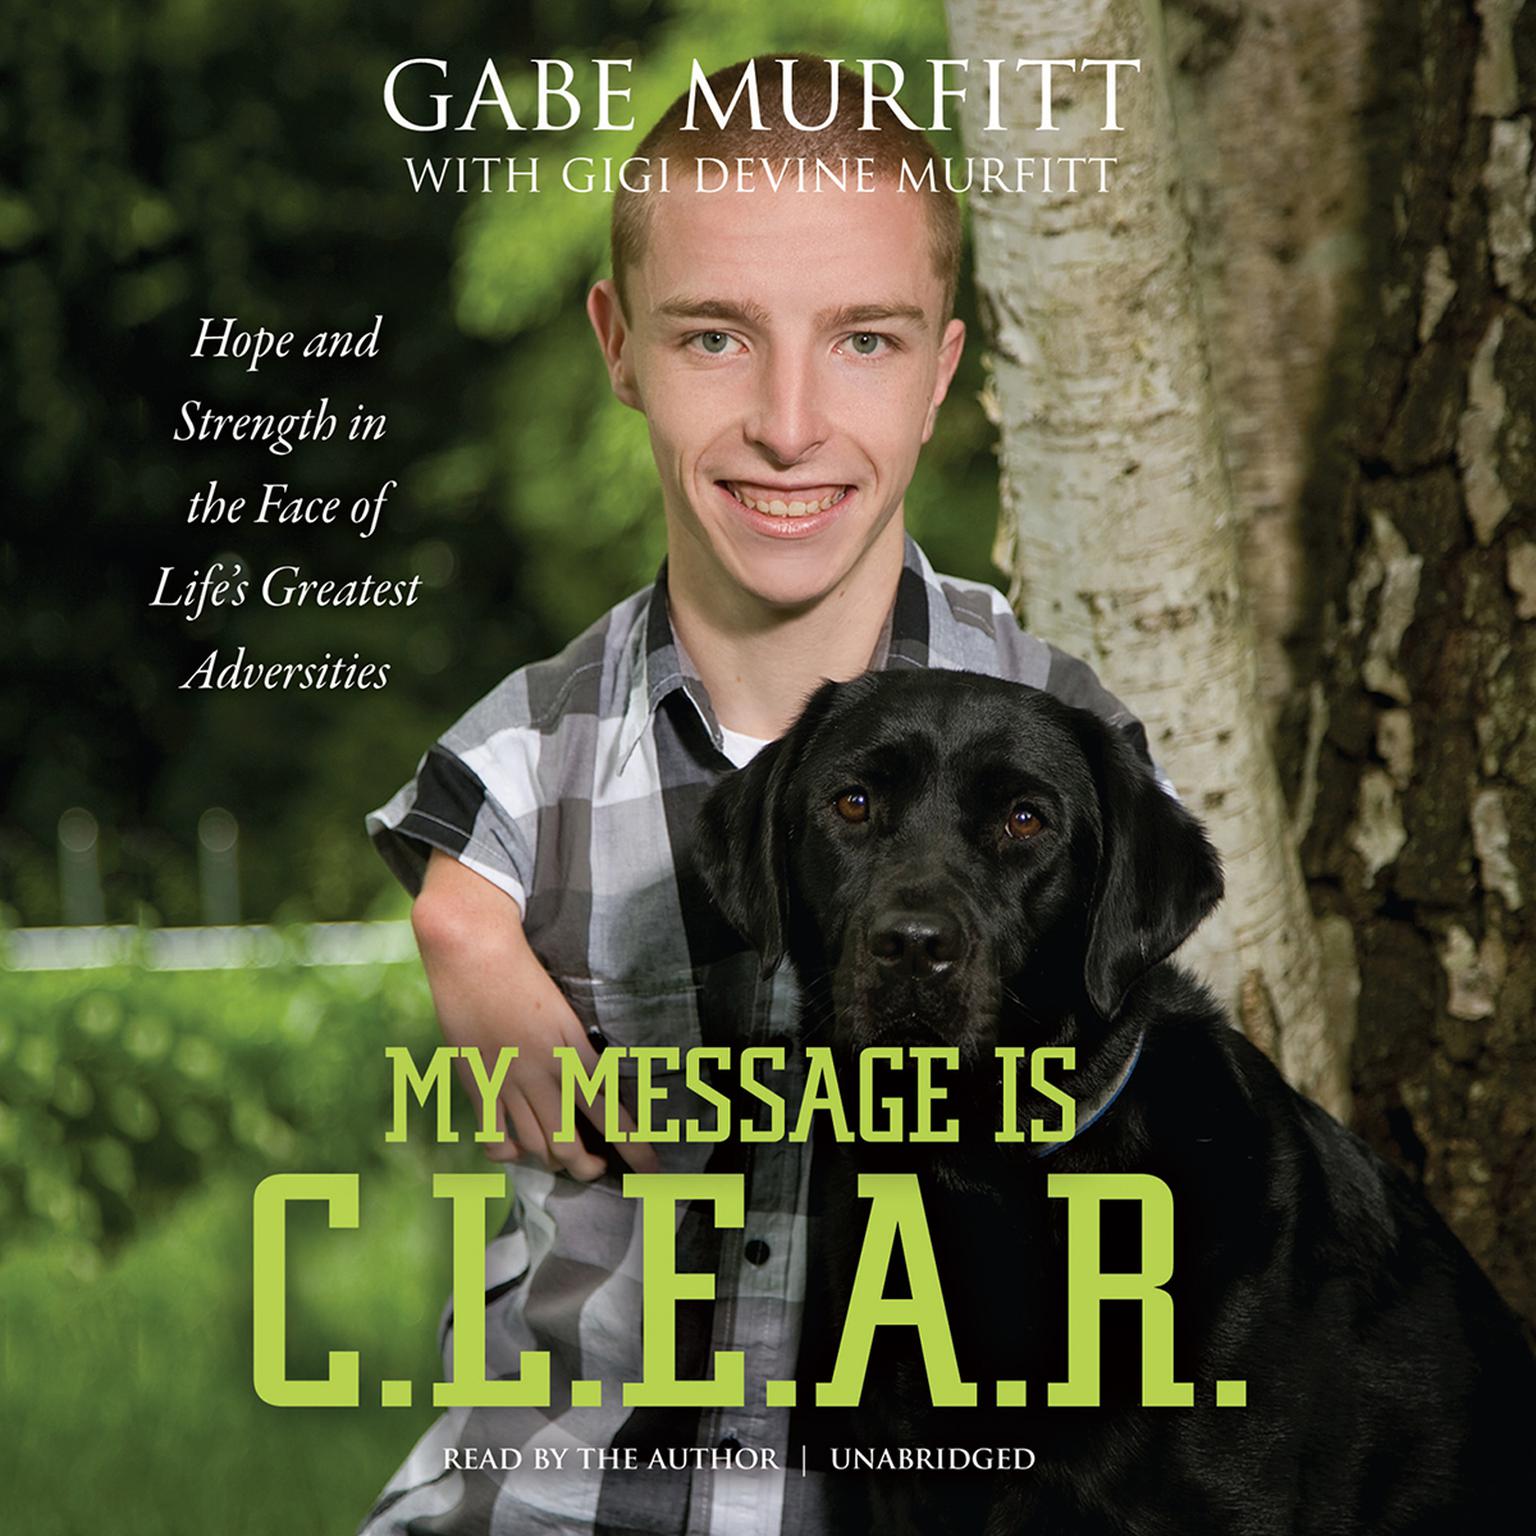 My Message Is C.L.E.A.R.: Hope and Strength in the Face of Life’s Greatest Adversities Audiobook, by Gabe Murfitt